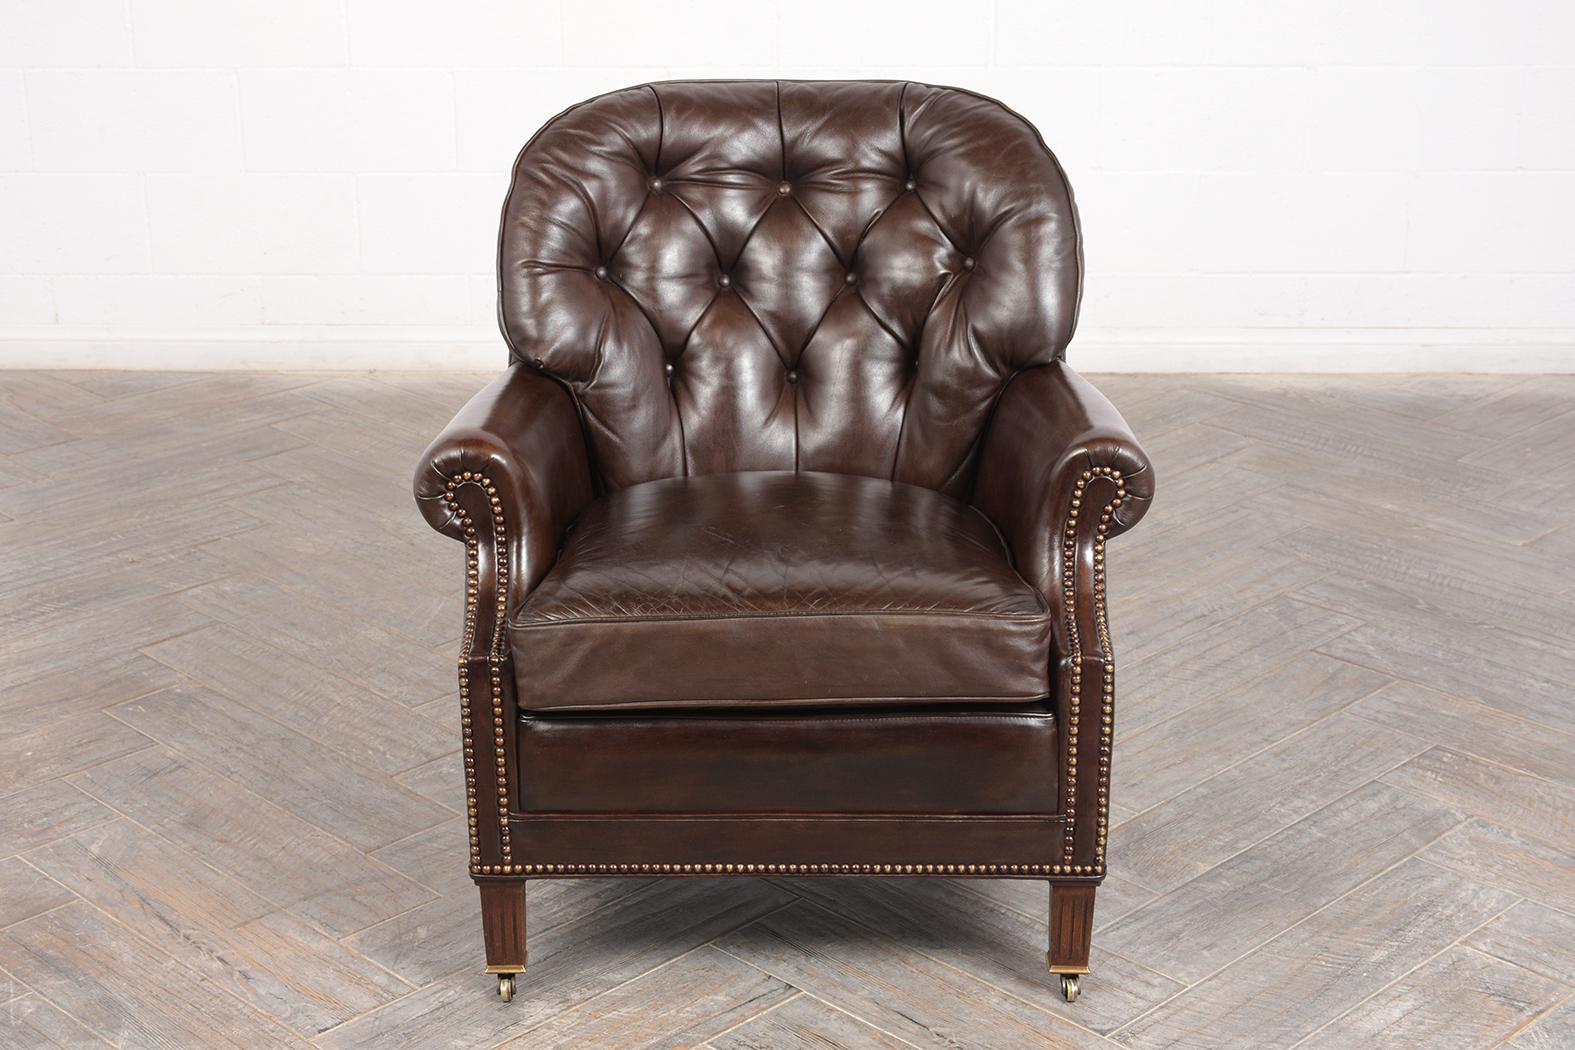 Pair of Tufted Regency Style Leather Club Chairs (amerikanisch)